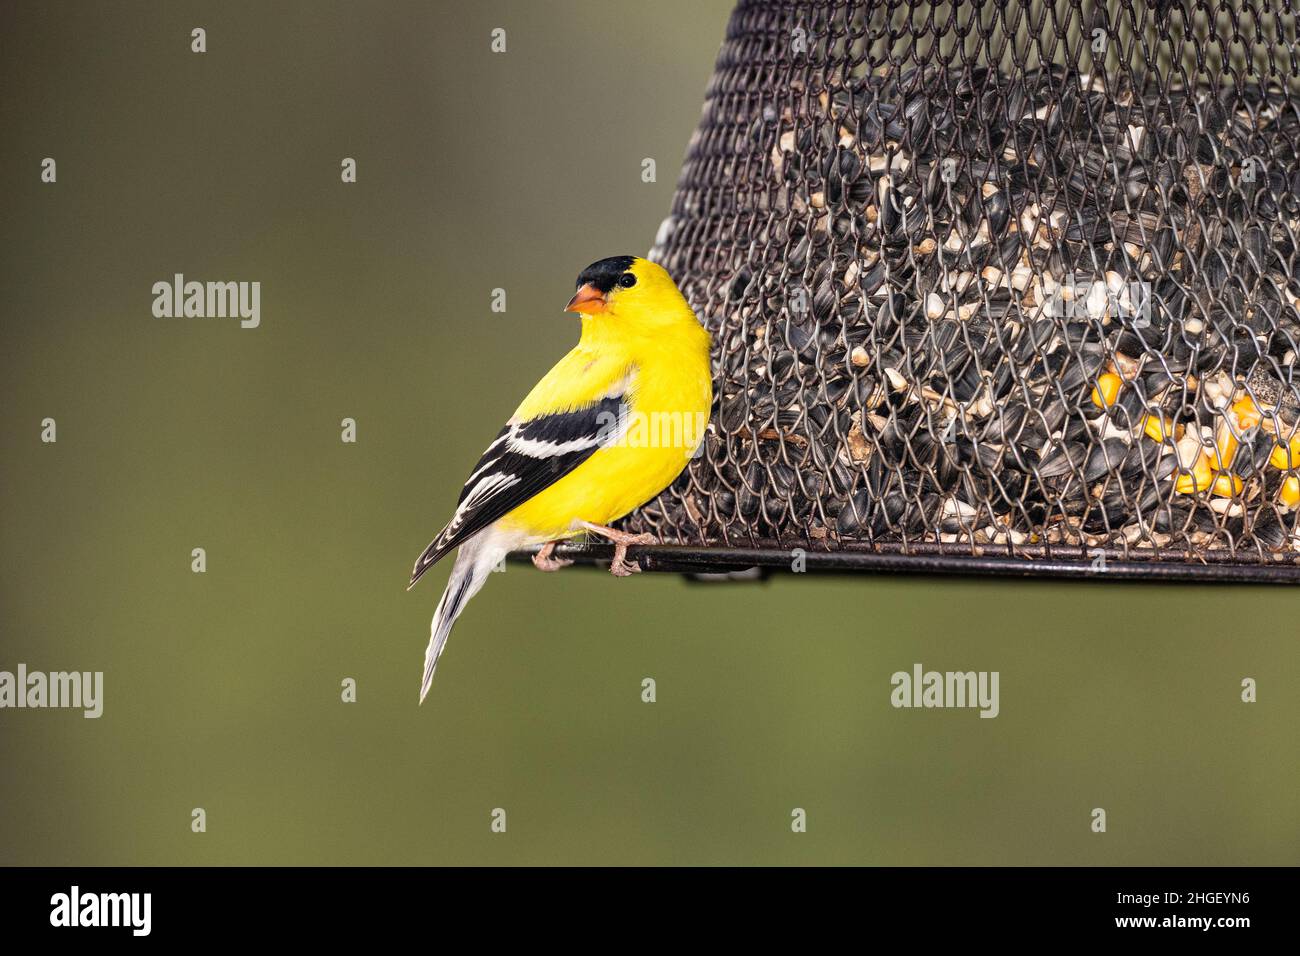 Male American Goldfinch on seed feeder. Stock Photo